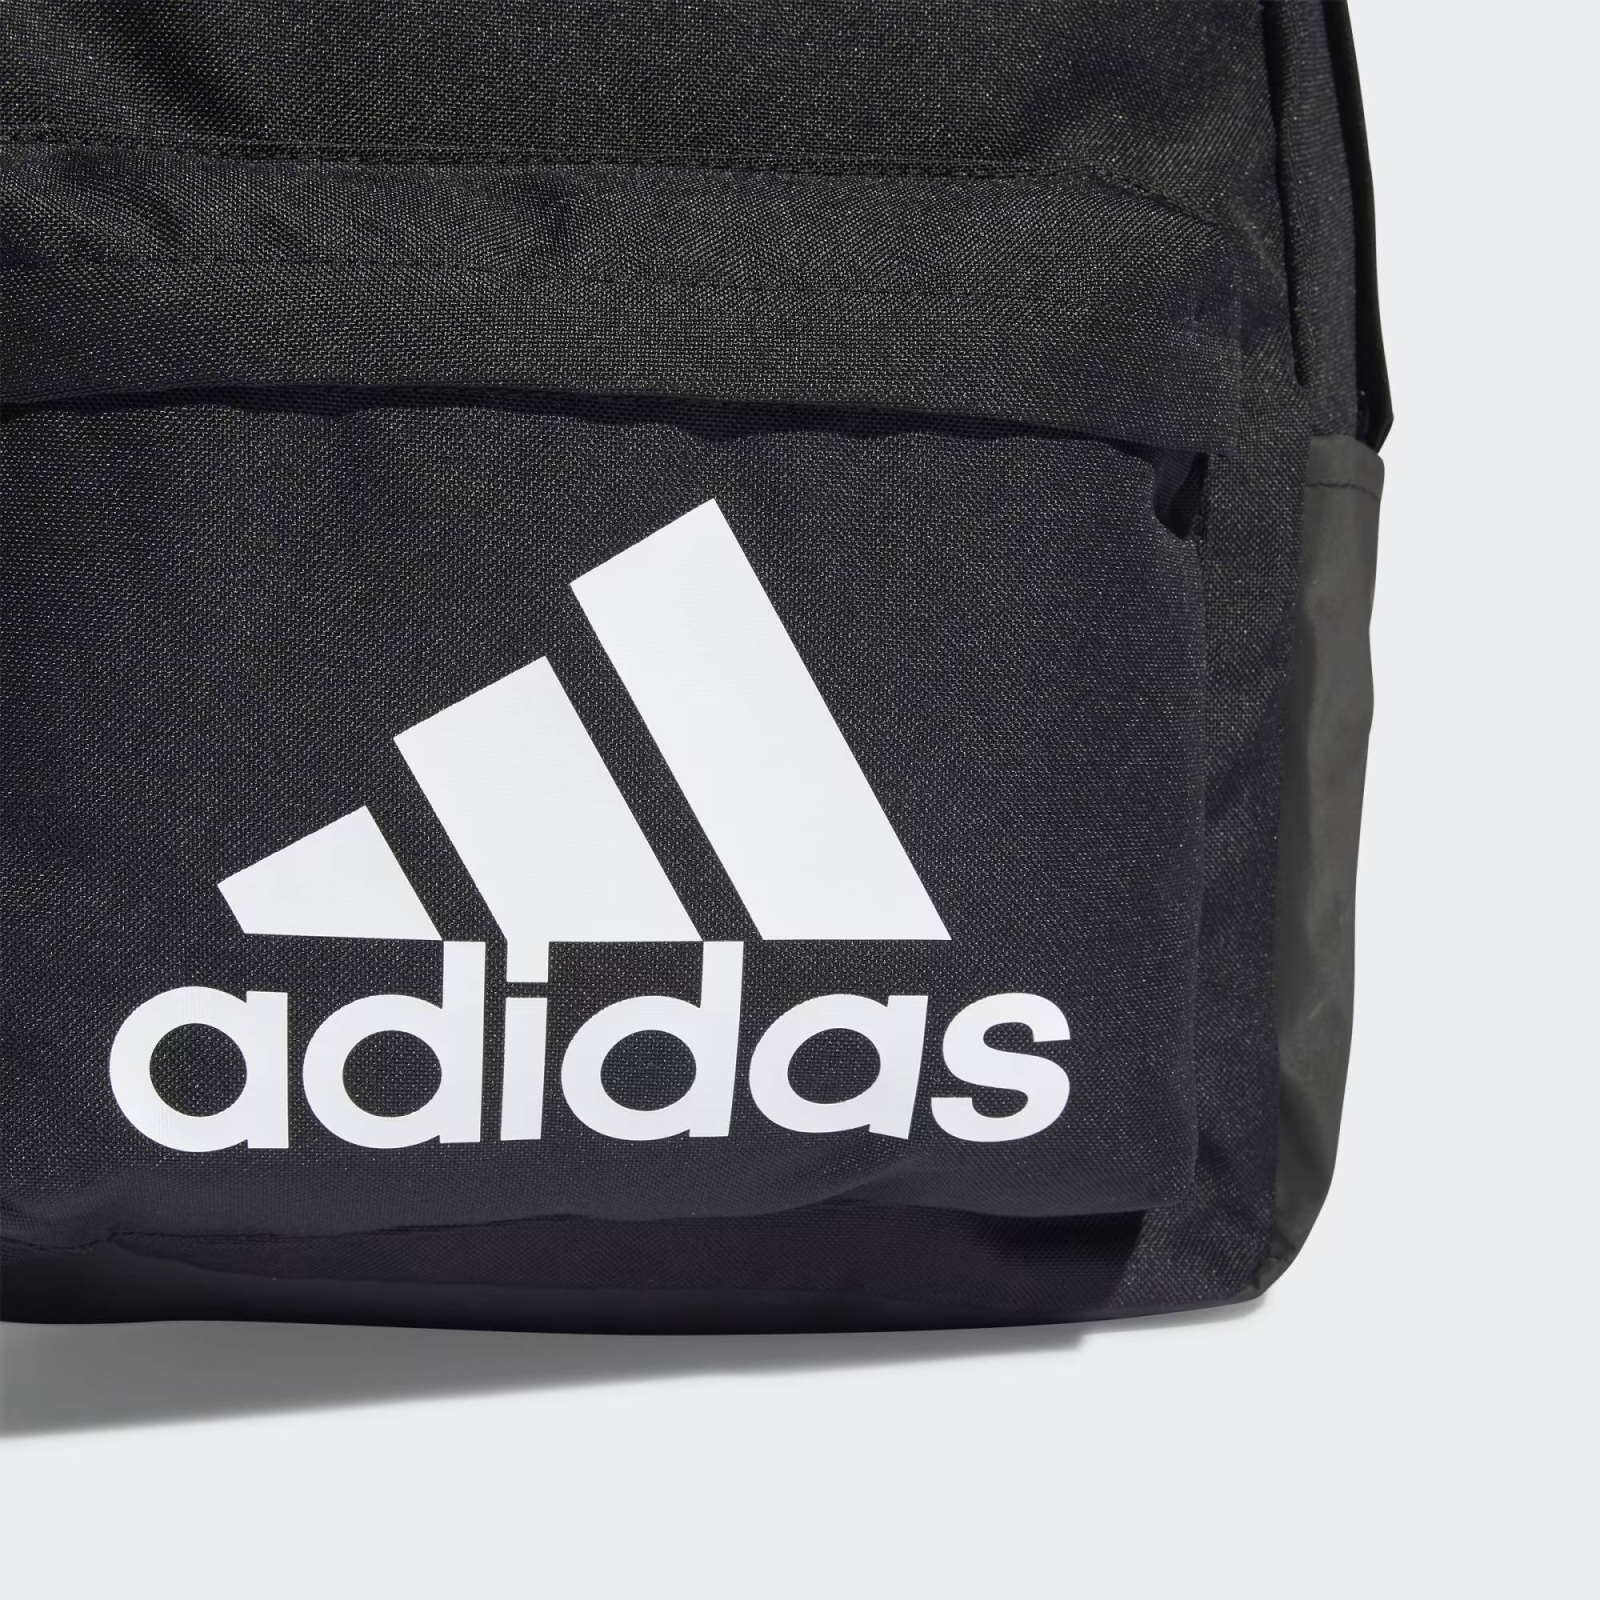 ADIDAS CLASSIC BOS BACK PACK